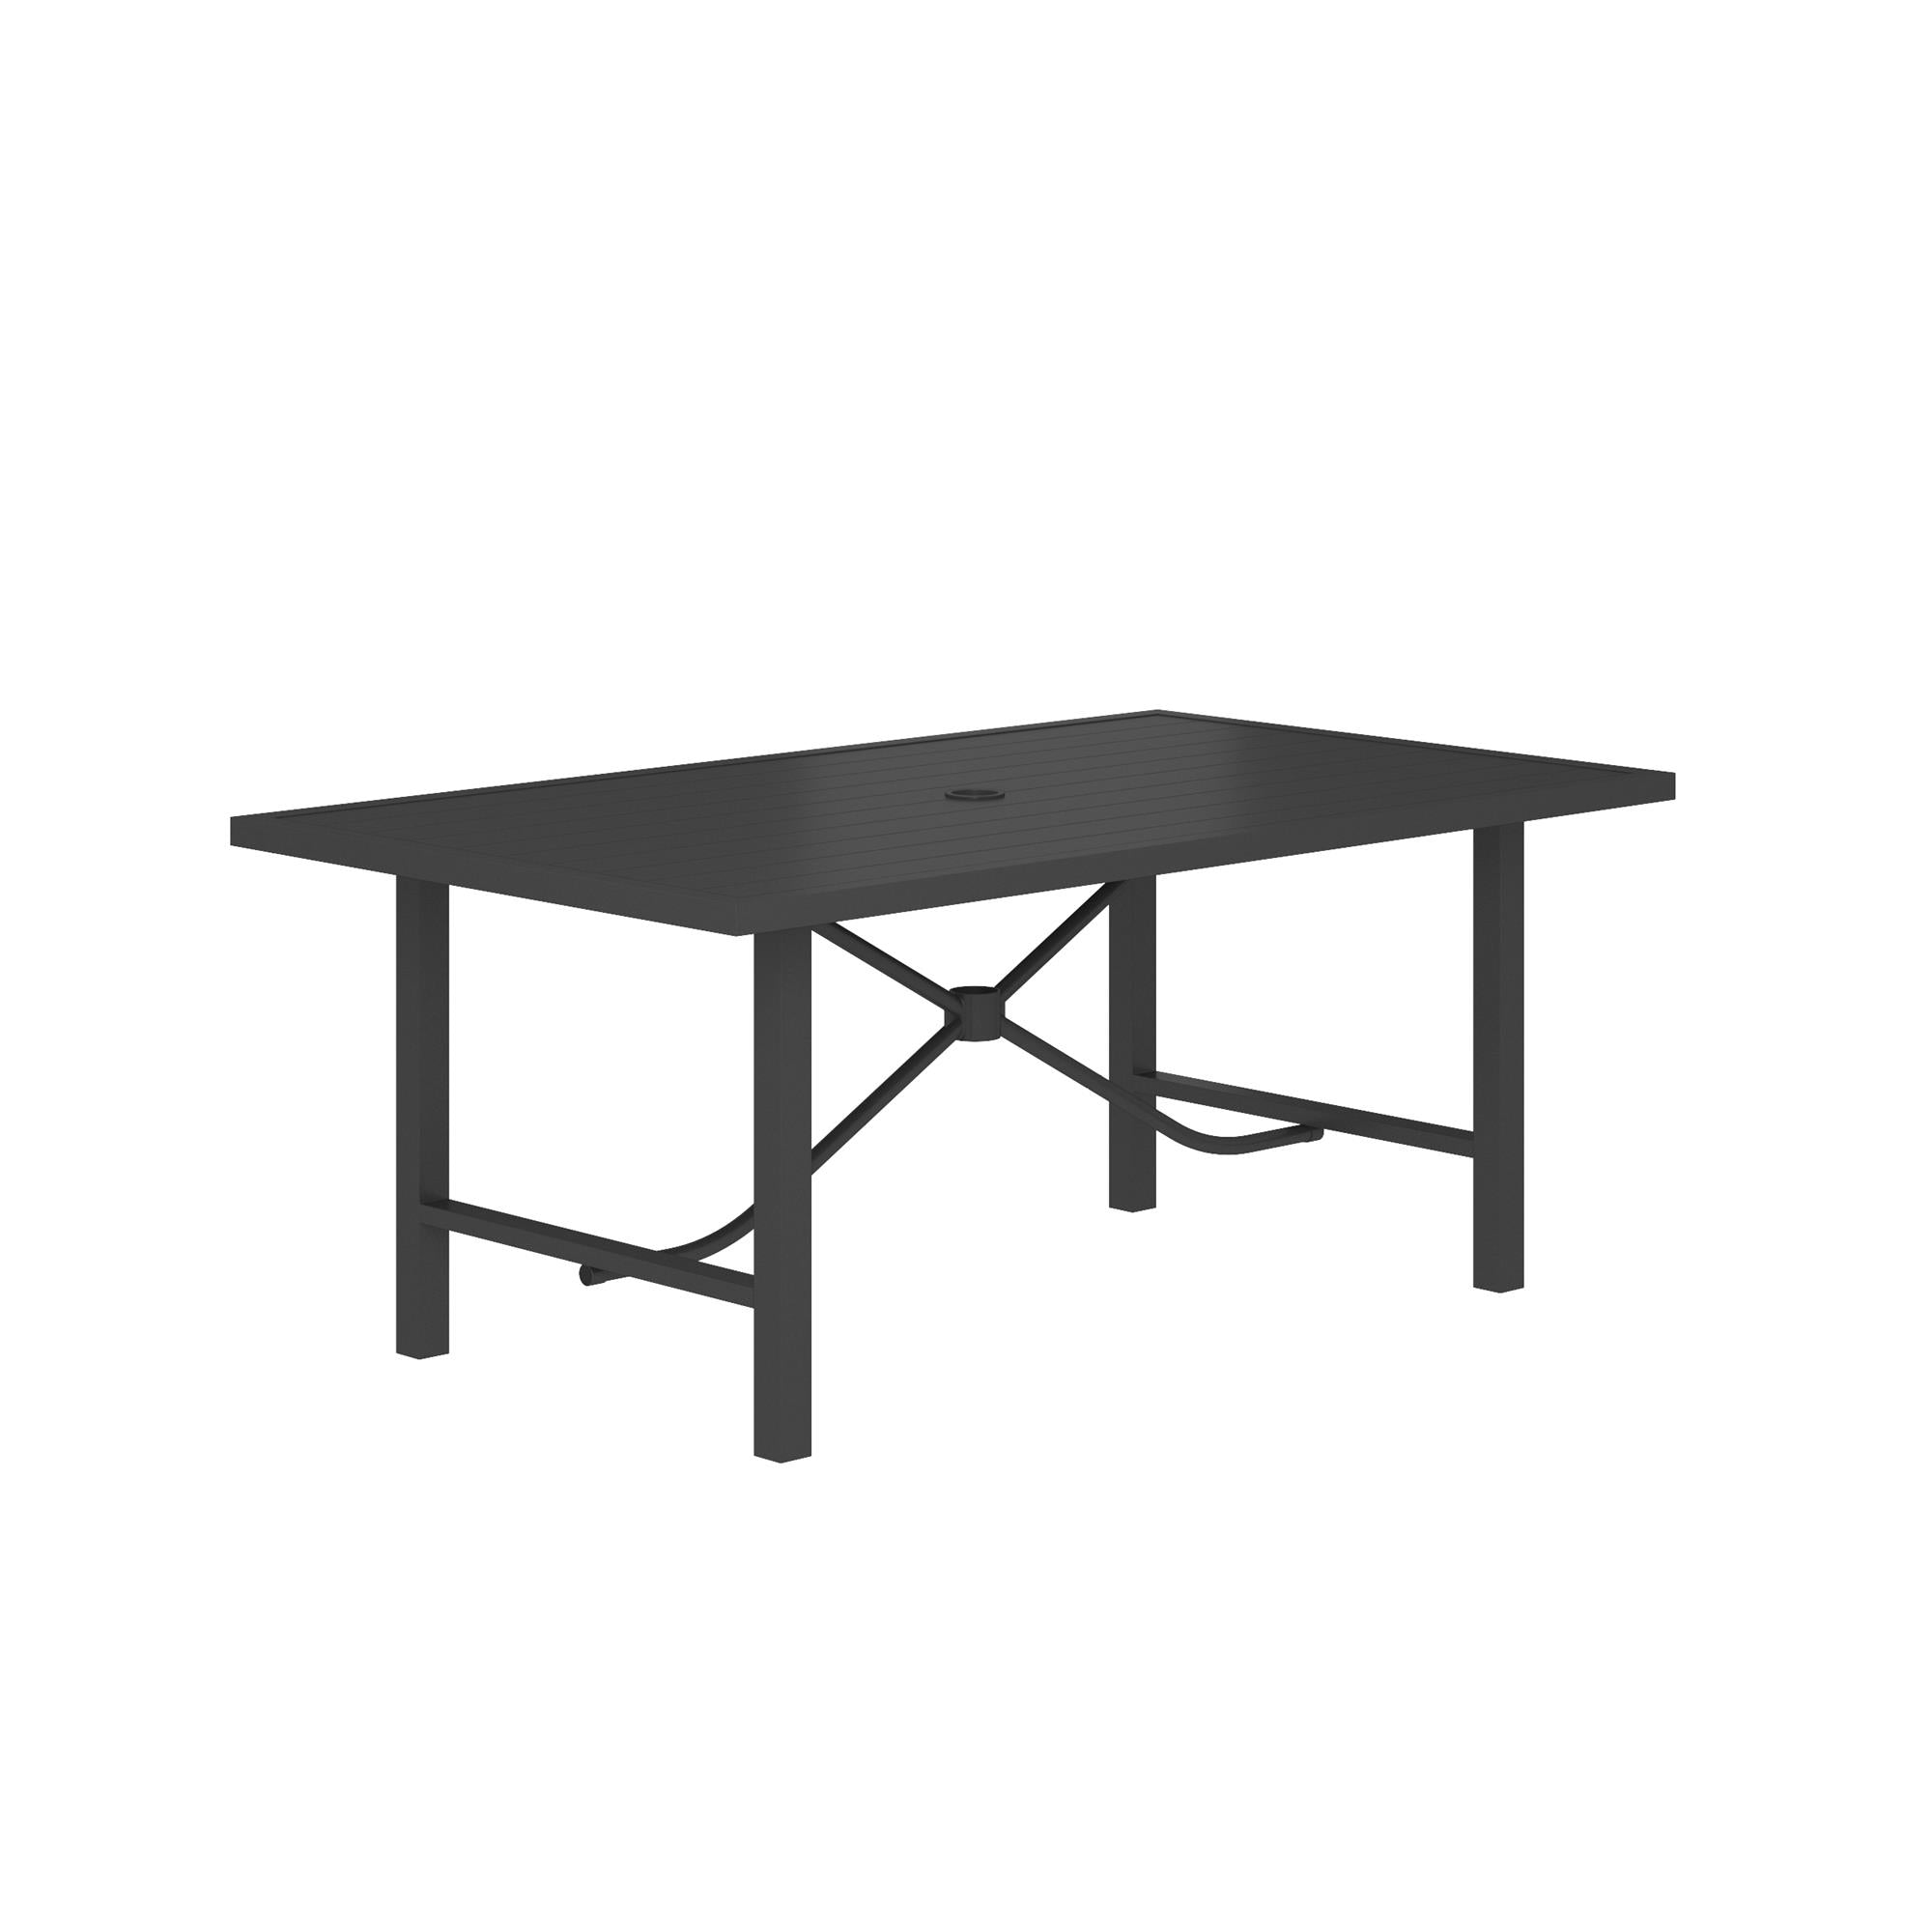 Patio Dining Table - Charcoal - N/A